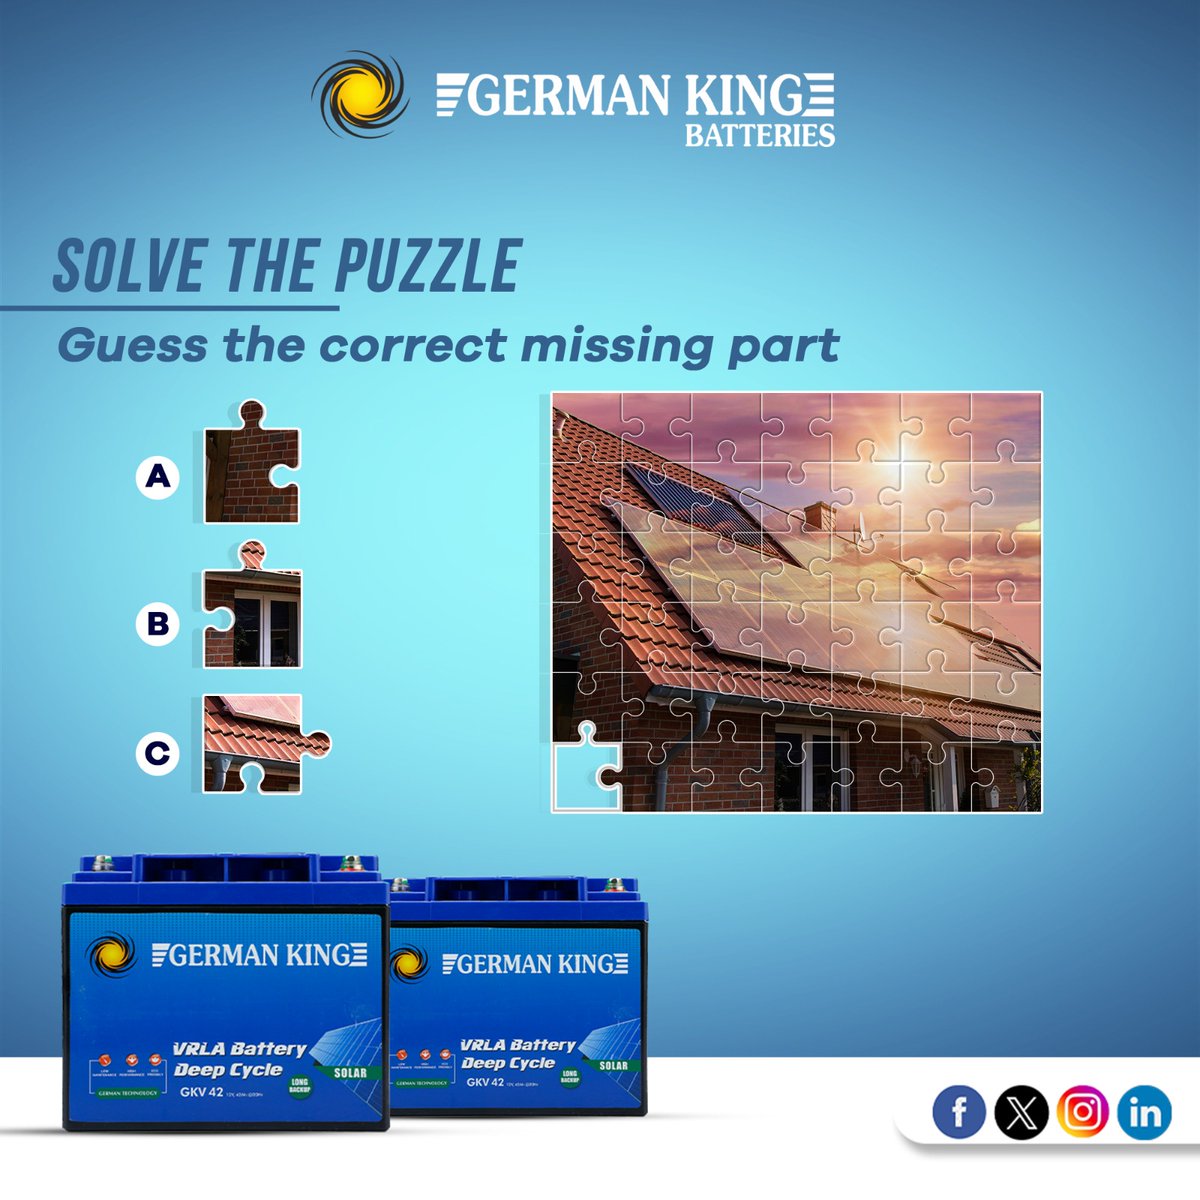 Can you solve this puzzle?
Try your hand at this brain teaser and see if you can answer it correctly.

#germankingbattery #germankingbatteries #quiz #GamePost #puzzlegame #puzzletime #solarbattery #solarenergypanels #solarpower #batterymanufacturers #Uganda #kampalauganda